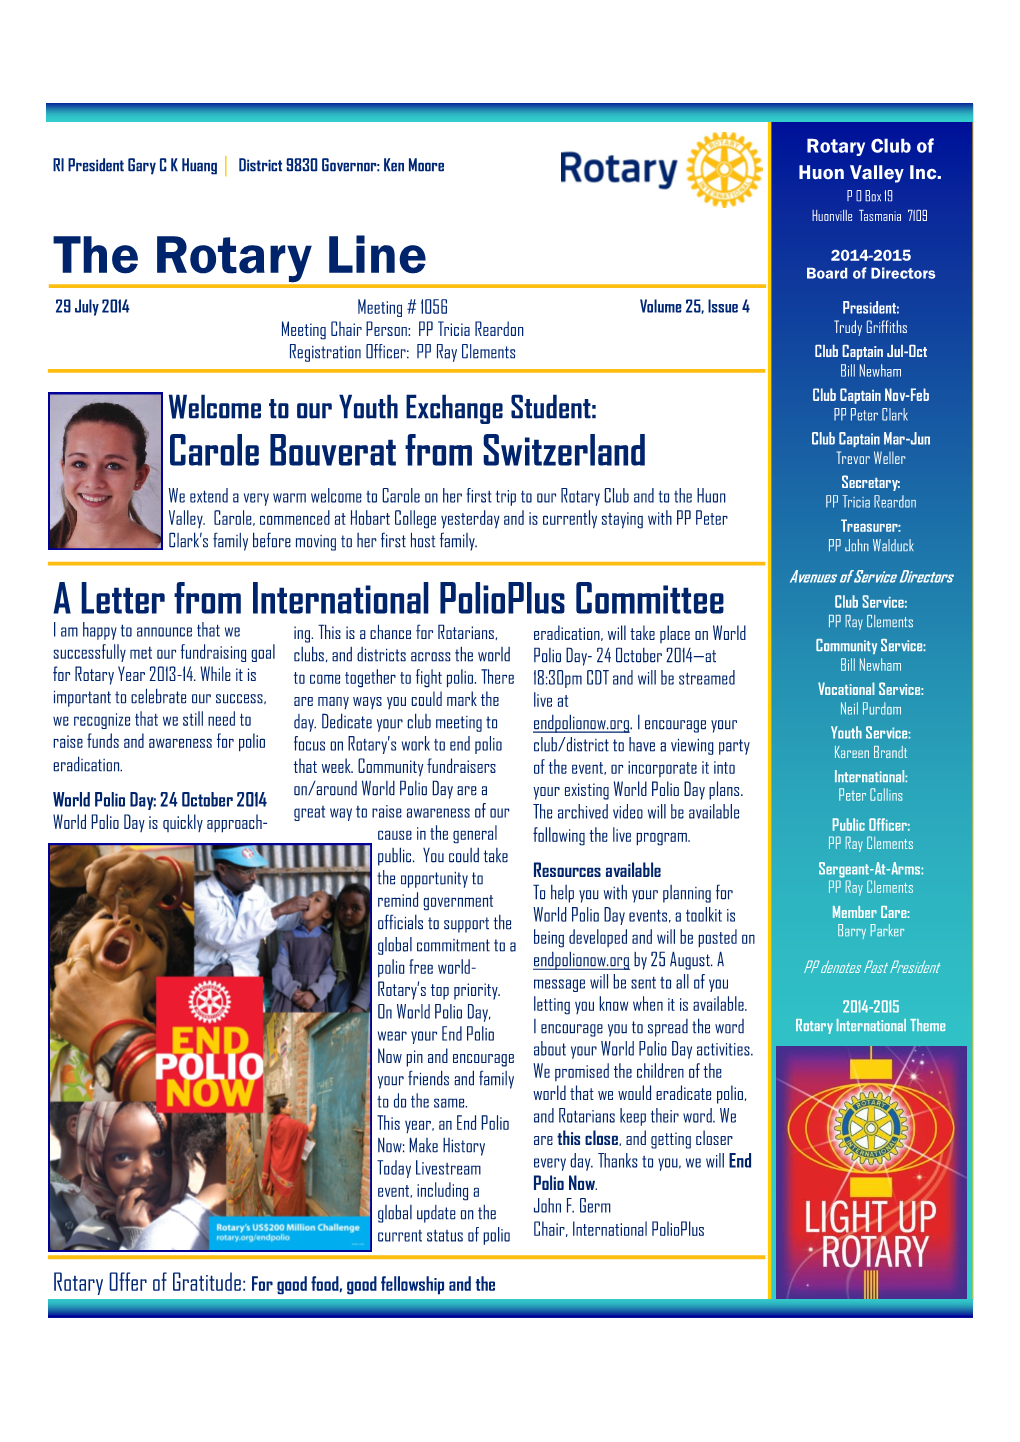 The Rotary Line Board of Directors